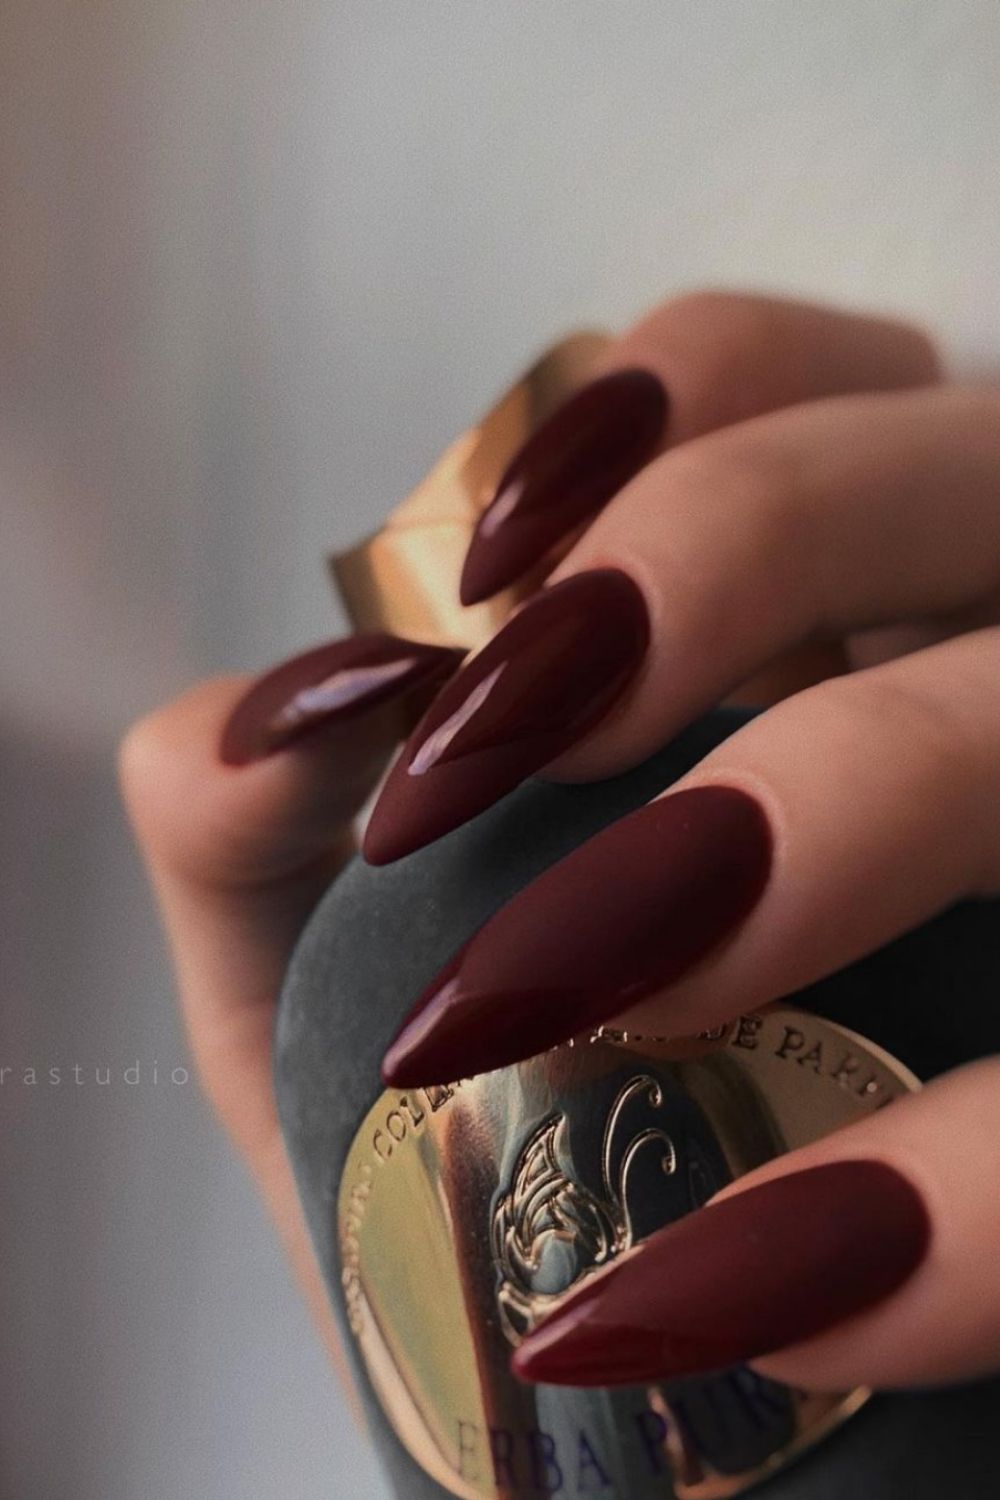 Burgundy nails design | Best winter nail colors 2021 to try